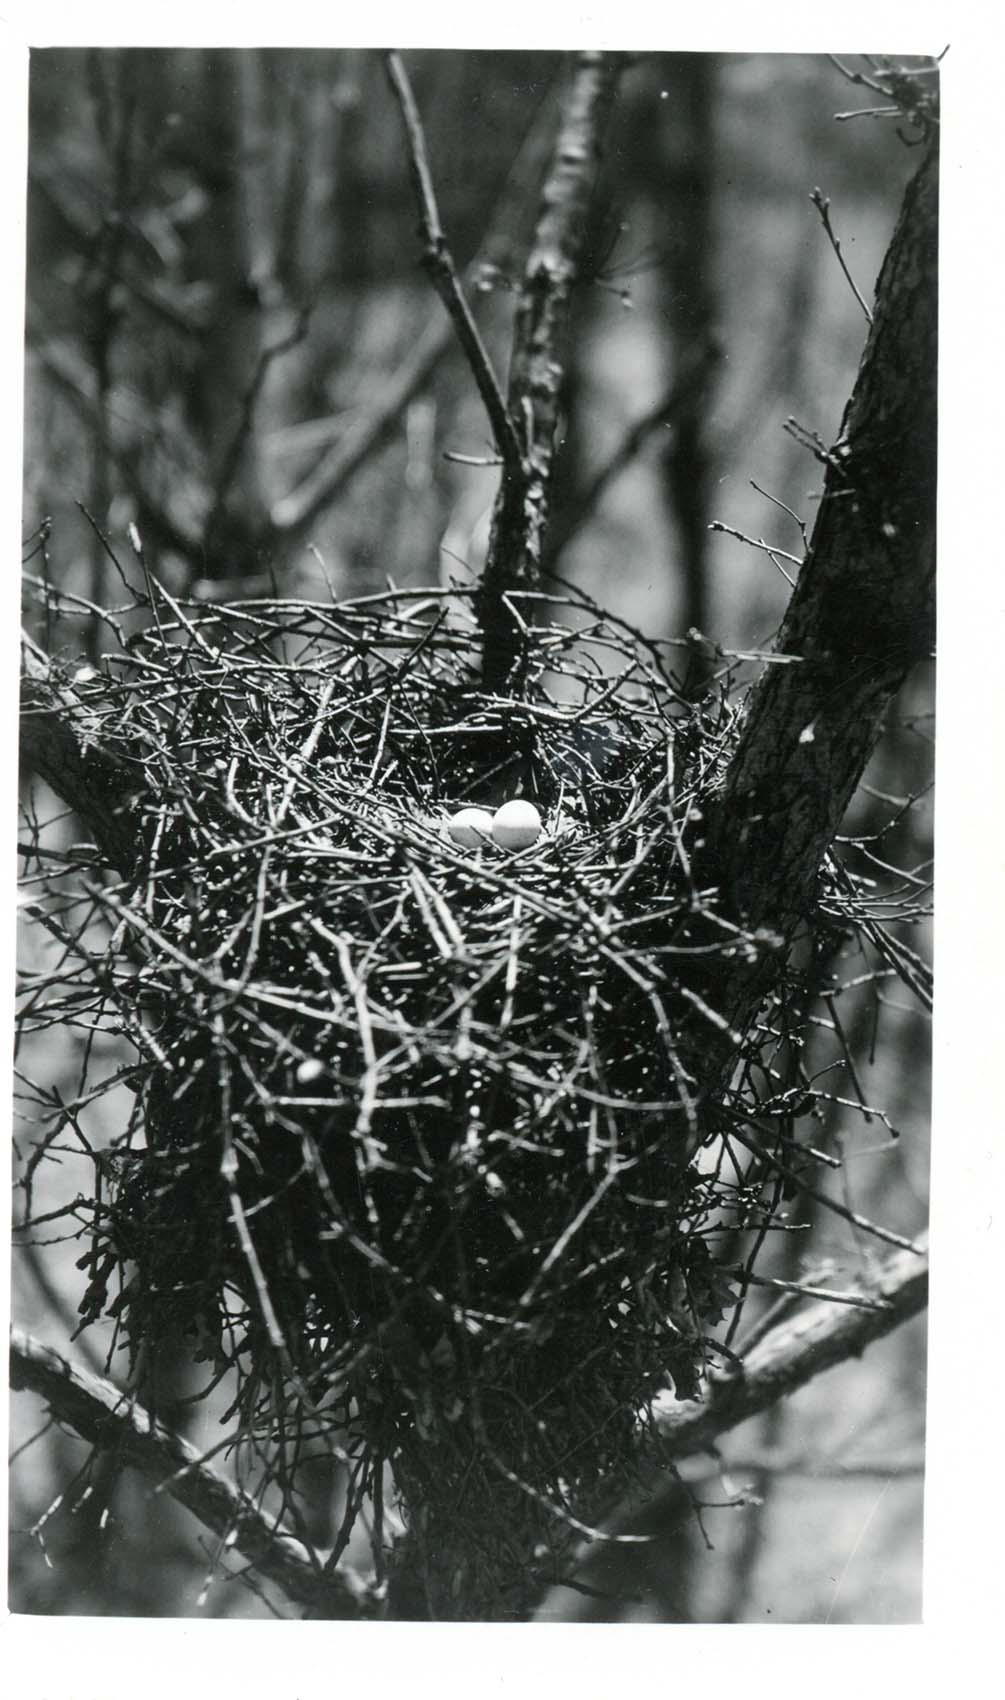 Photograph of eggs in a Cooper's Hawk nest